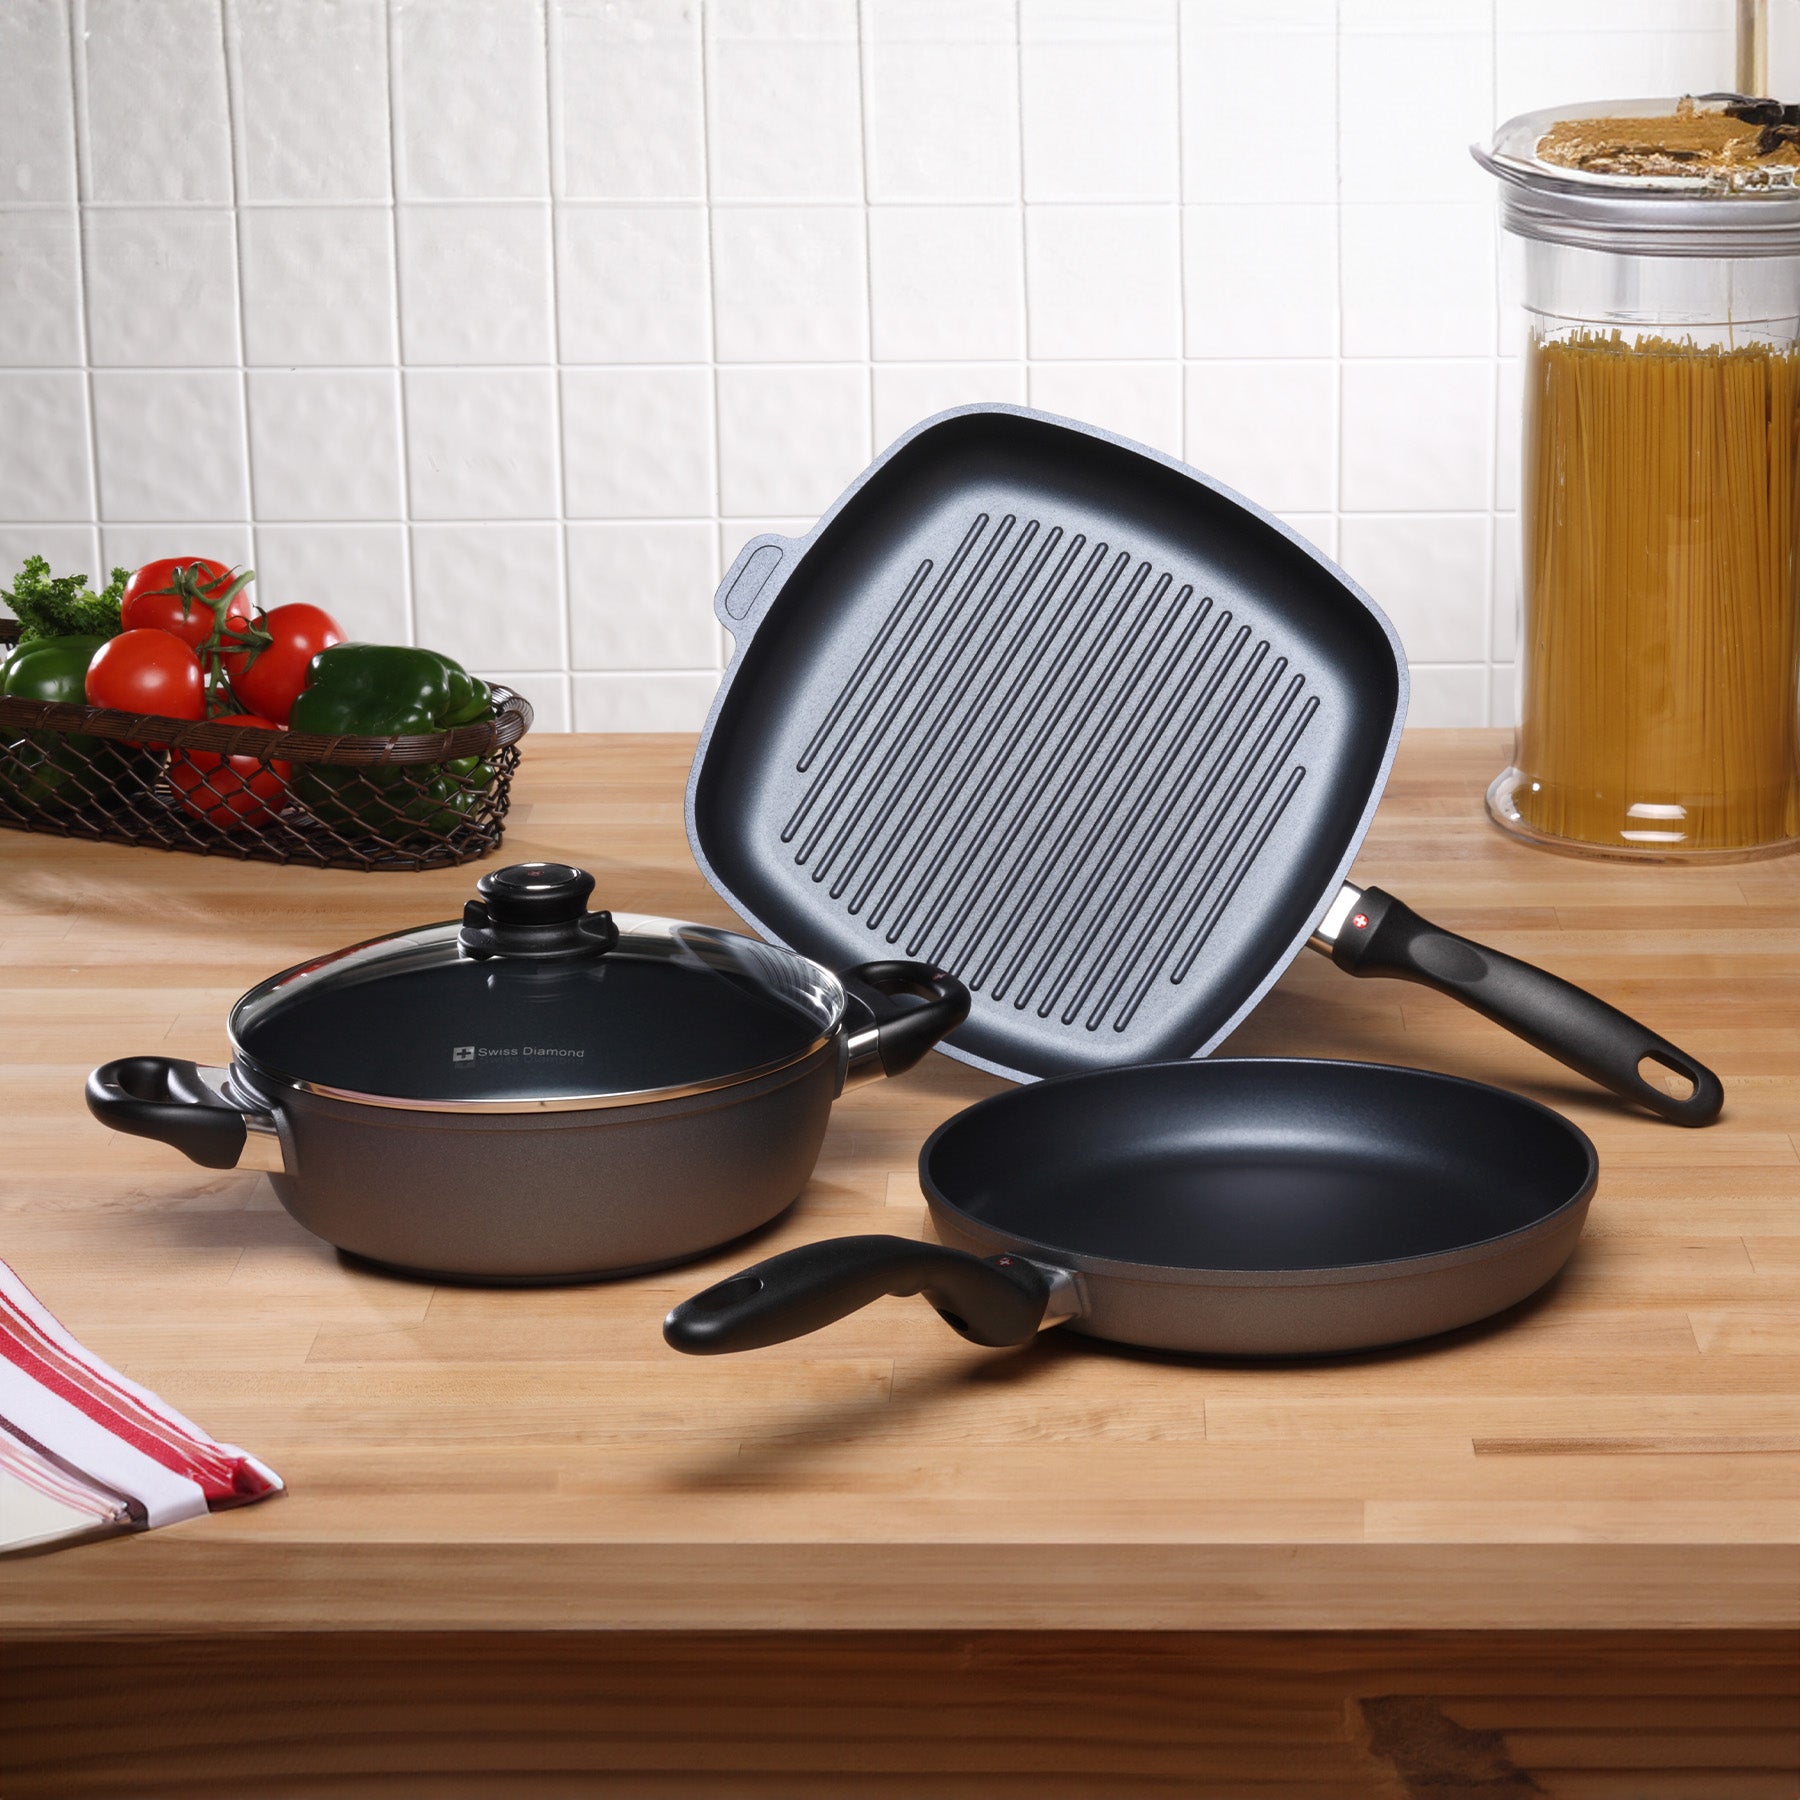 HD Nonstick 4-Piece Set - Fry Pan, Casserole & Grill Pan in use on kitchen counter